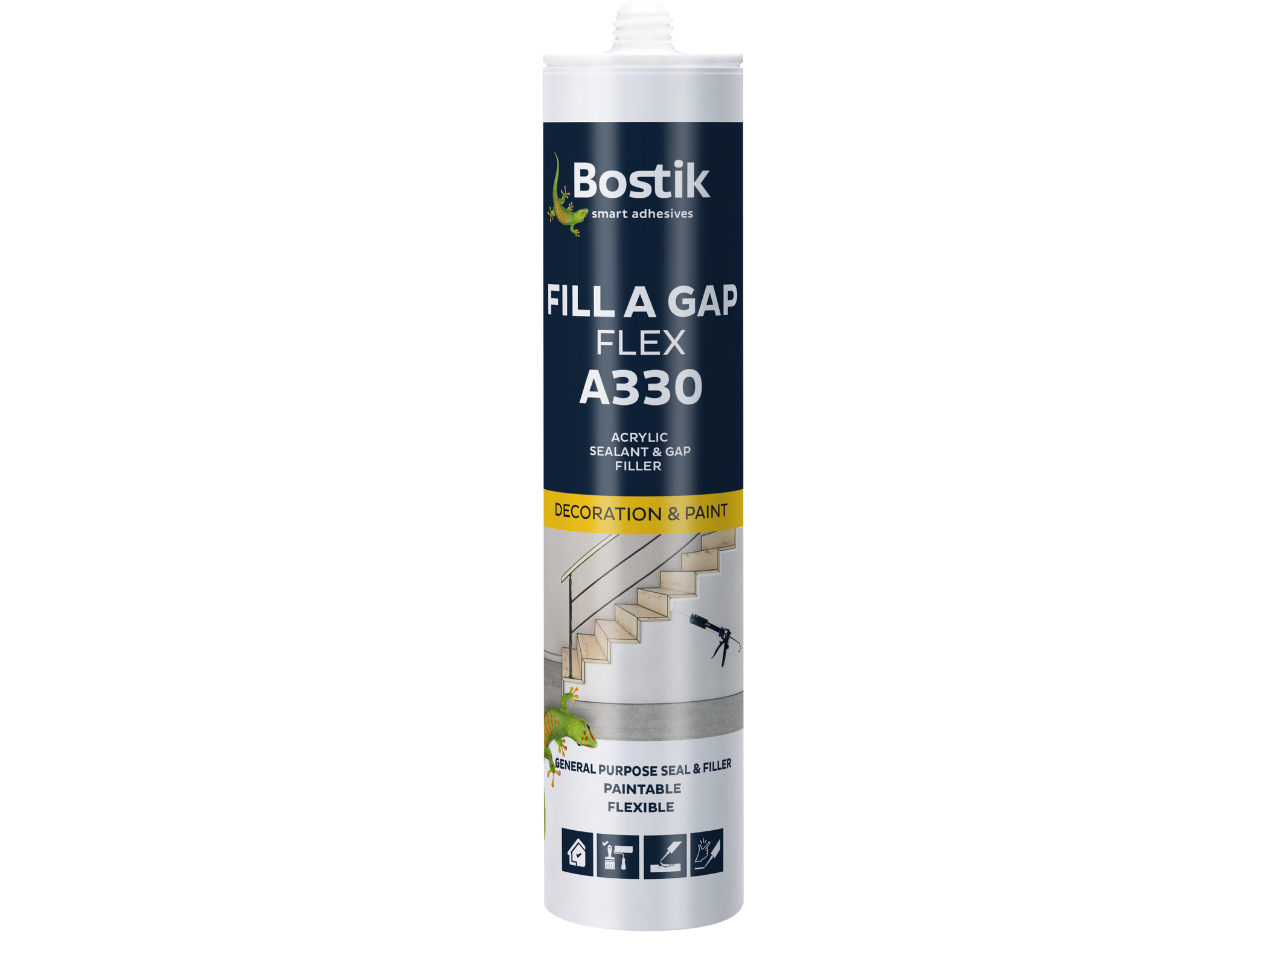 bostik-indonesia-product-image-a330.png